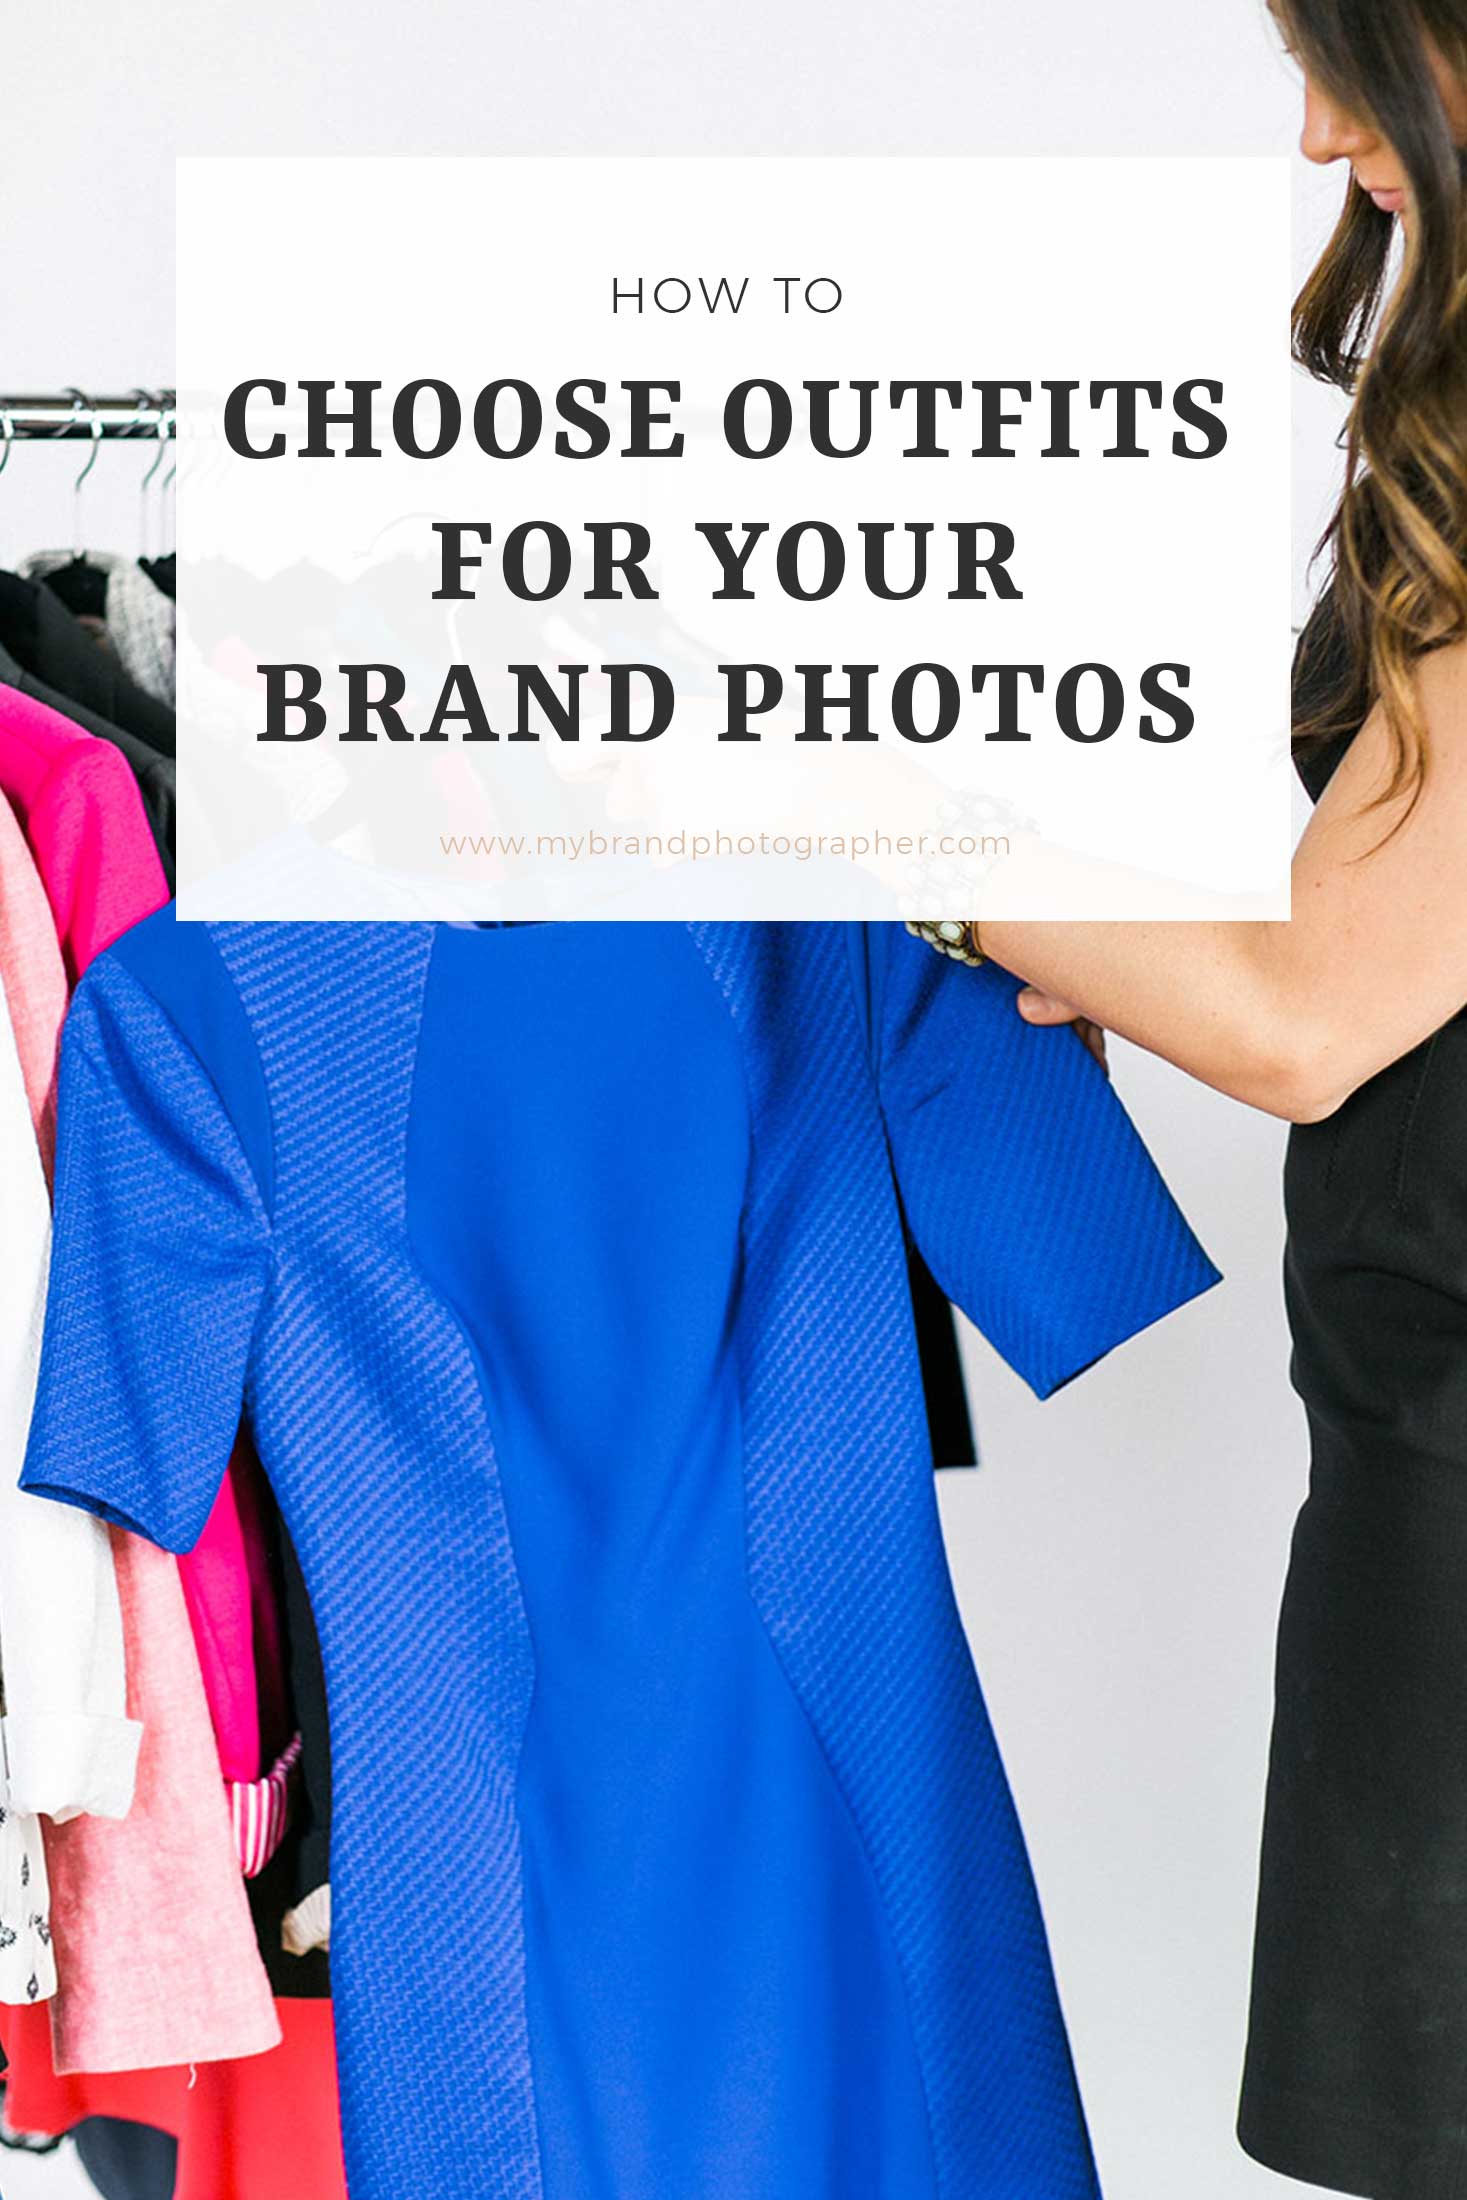 My Brand Photographer, a brand photographer for creatives, artists, bloggers, florists, stylists, planners, coaches, designers, fempreneurs, and entrepreneurs. What to wear for brand photos, choosing outfits for your photo session. Milwaukee, Wisconsin. #creativepreneur #womeninbusiness #brandphotographer #brandphotography